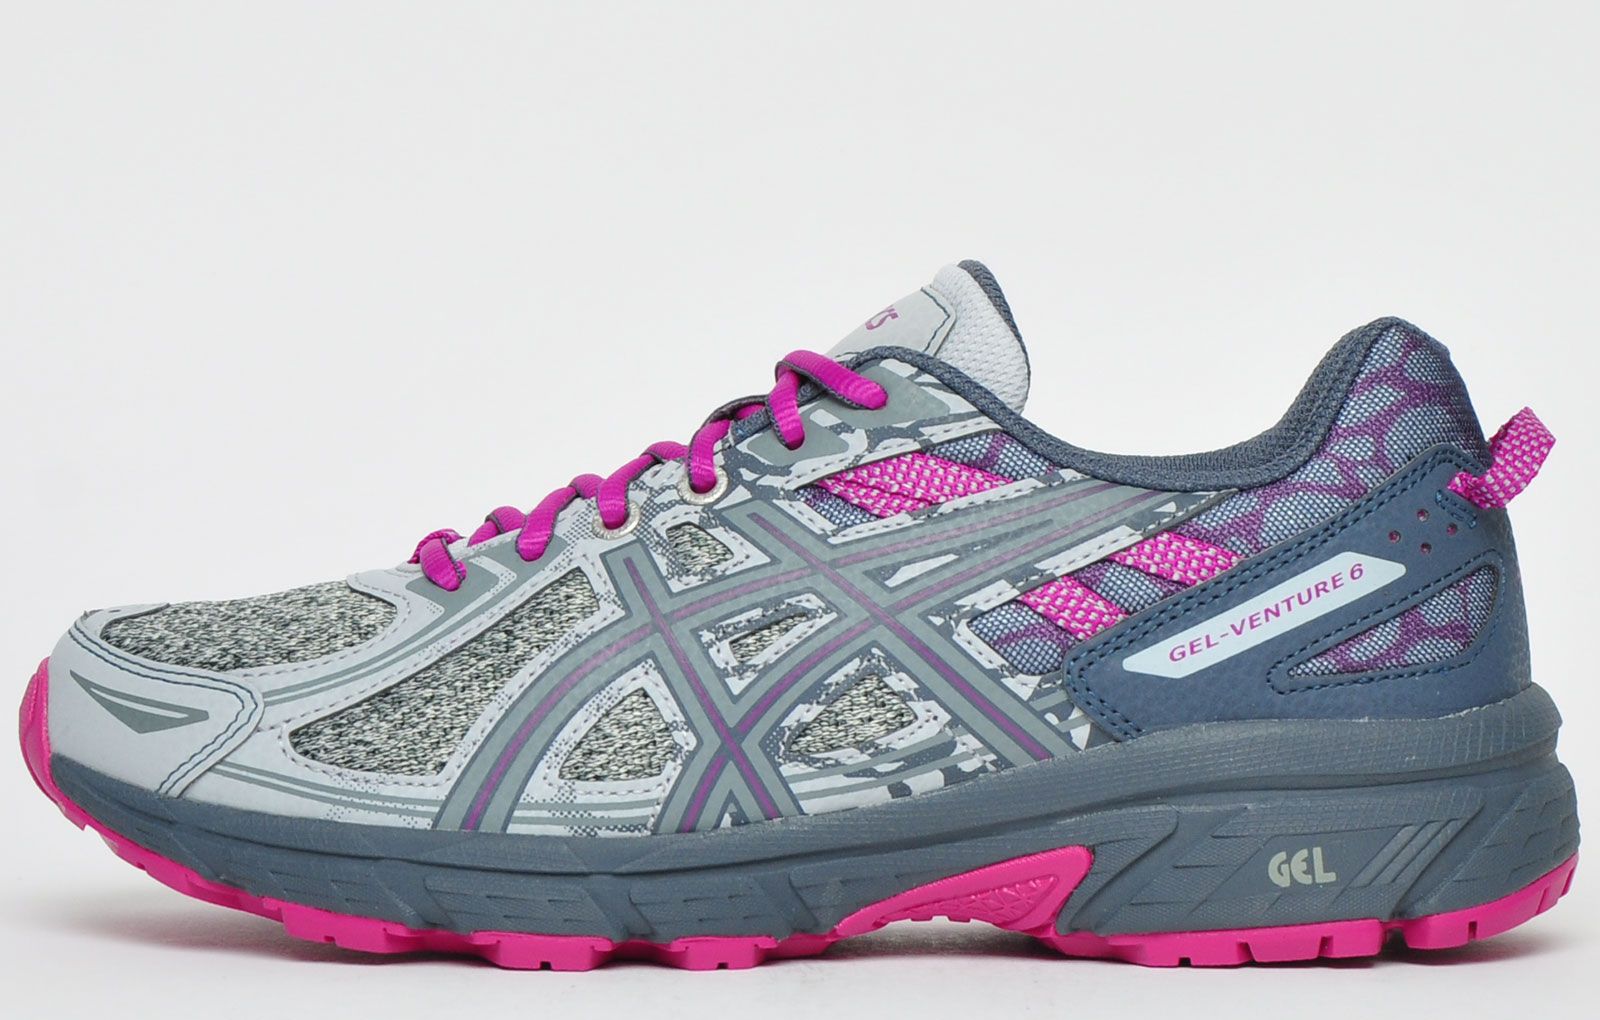 These Asics Gel Venture 6 womens all terrain running shoes will provide excellent support and traction no matter what comes your way. Featuring a practical lugged outsole that offers grip on uphill and downhill conditions. Whether you’re a beginner or professional, these all terrain running shoes are perfect for you! <p>Engineered from a fusion of textile mesh and synthetic materials, these Asics Gel Venture 6 womens all terrain running shoes features a lightweight design with maximum performance capabilities, the Asics Venture 6 is a must have on and off-road shoe that will deliver every time. </p> <p>- Textile mesh upper construction enhances ventilation </p> <p>- Durable synthetic overlays deliver additional support </p> <p>- Stitched Toe Bumper delivers extra protection against trail hazards </p> <p>- Removable Sockliner delivers a comfy fit </p> <p>- Rearfoot Gel cushioning system delivers shock resistance in every stride </p> <p>- Trustic system reduces weight whilst upkeeping the support </p> <p>- Asics Branding throughout</p>